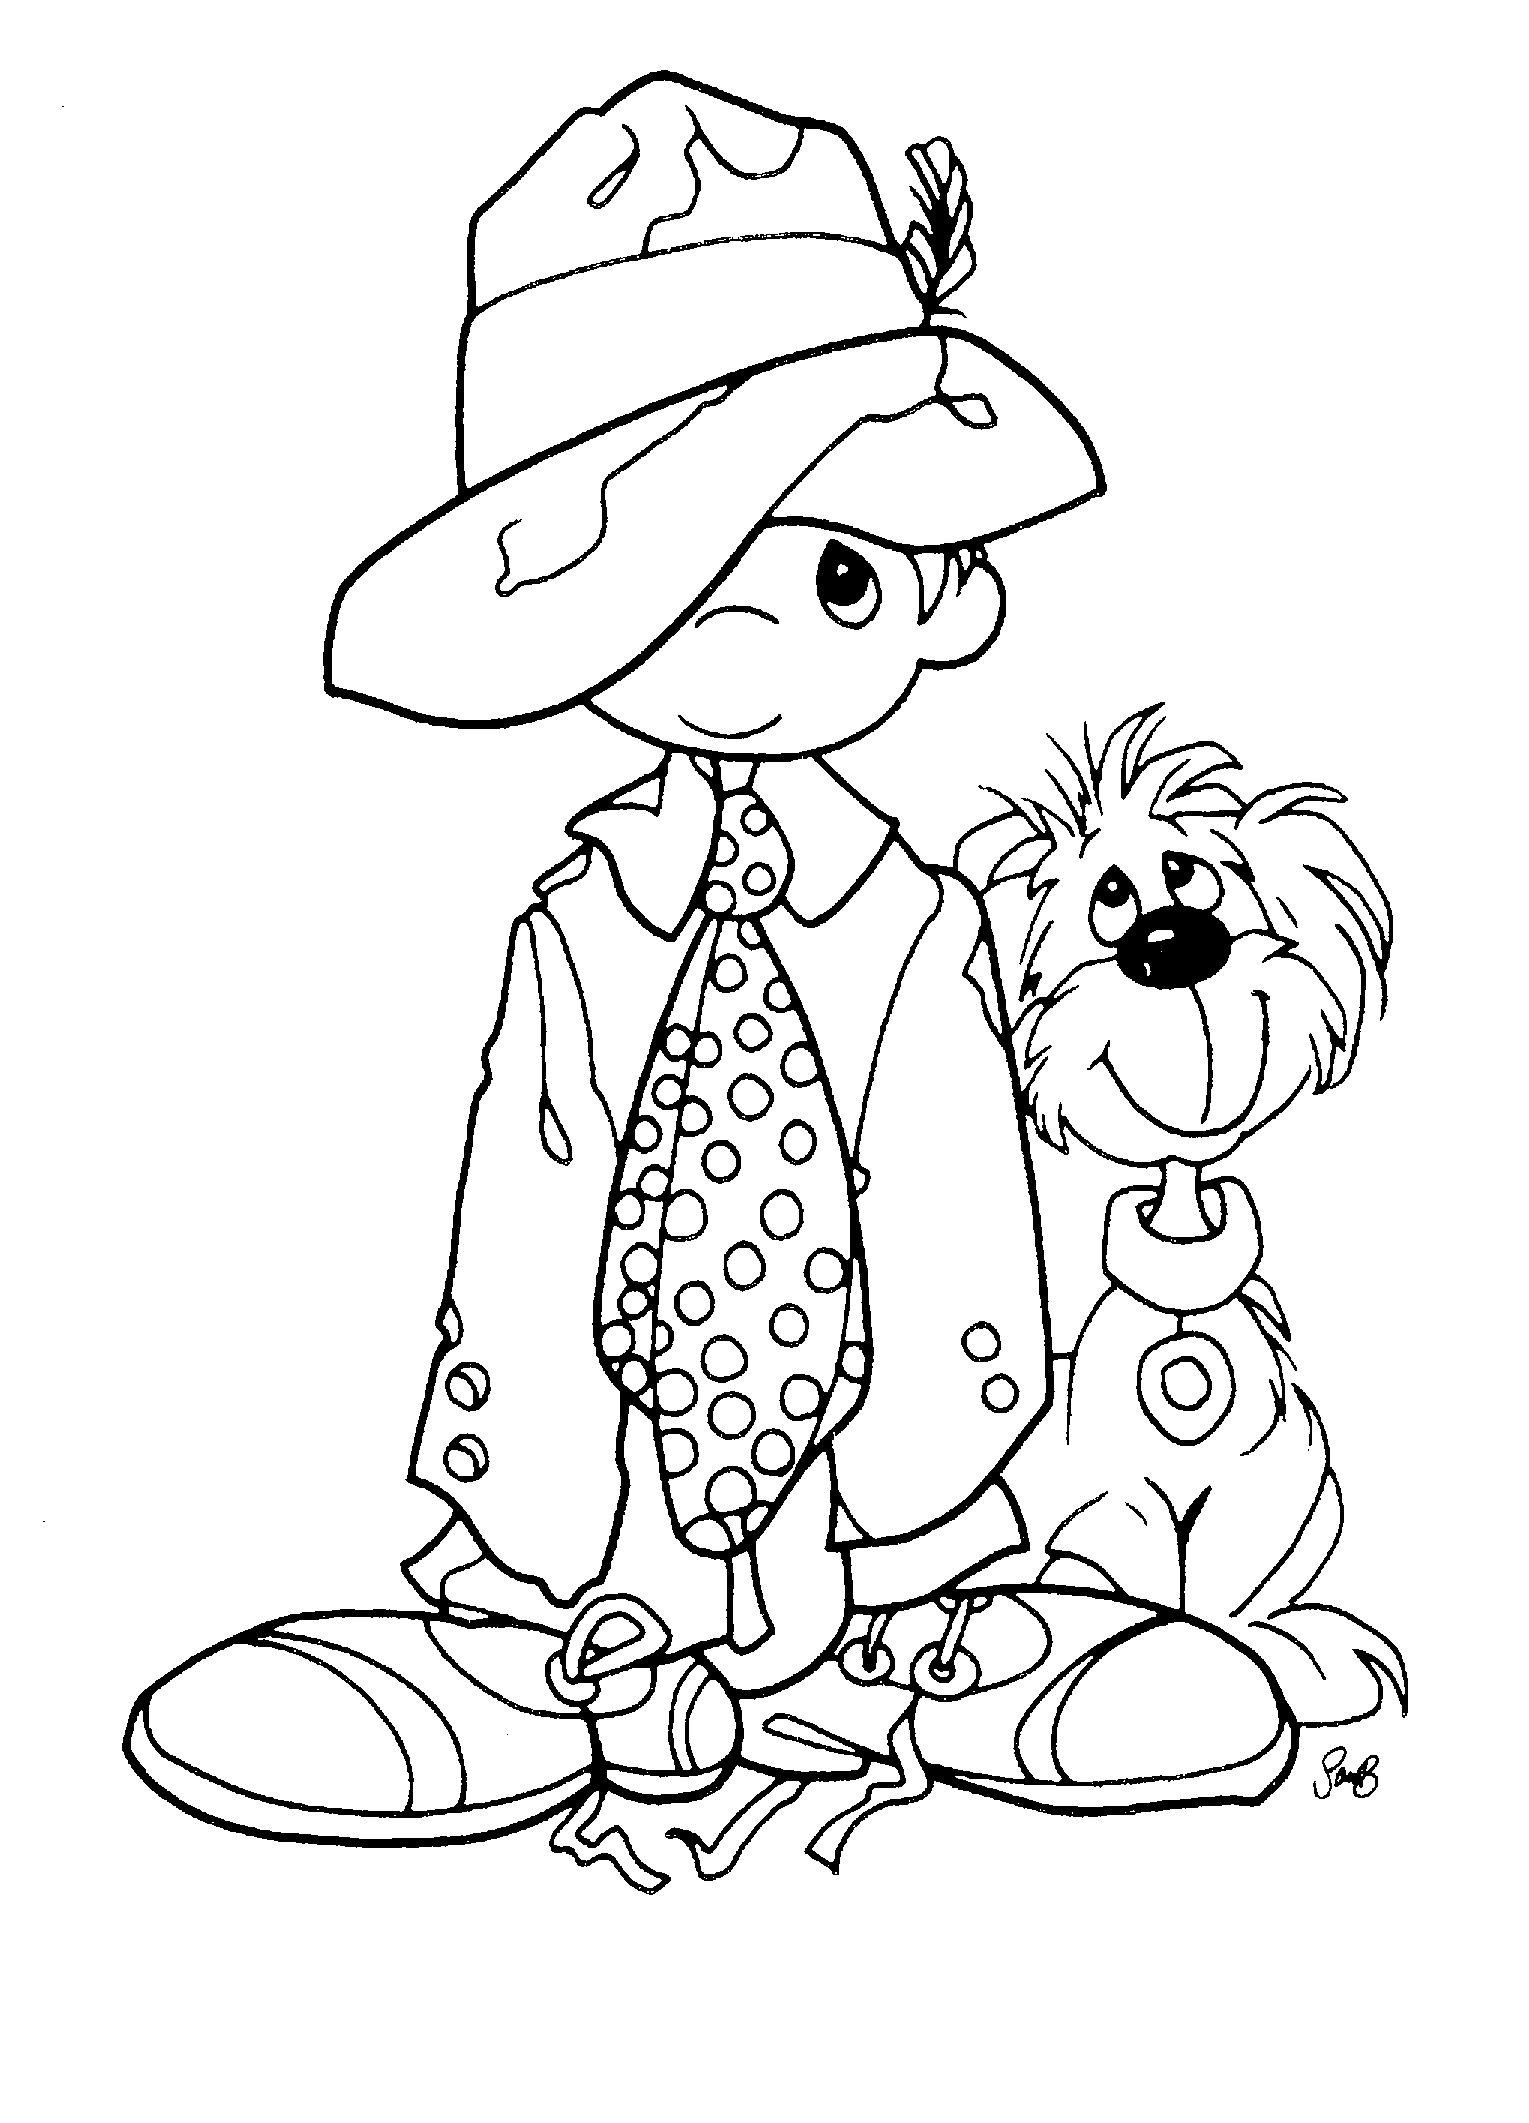 free coloring pages of precious moments halloween. young boy ...